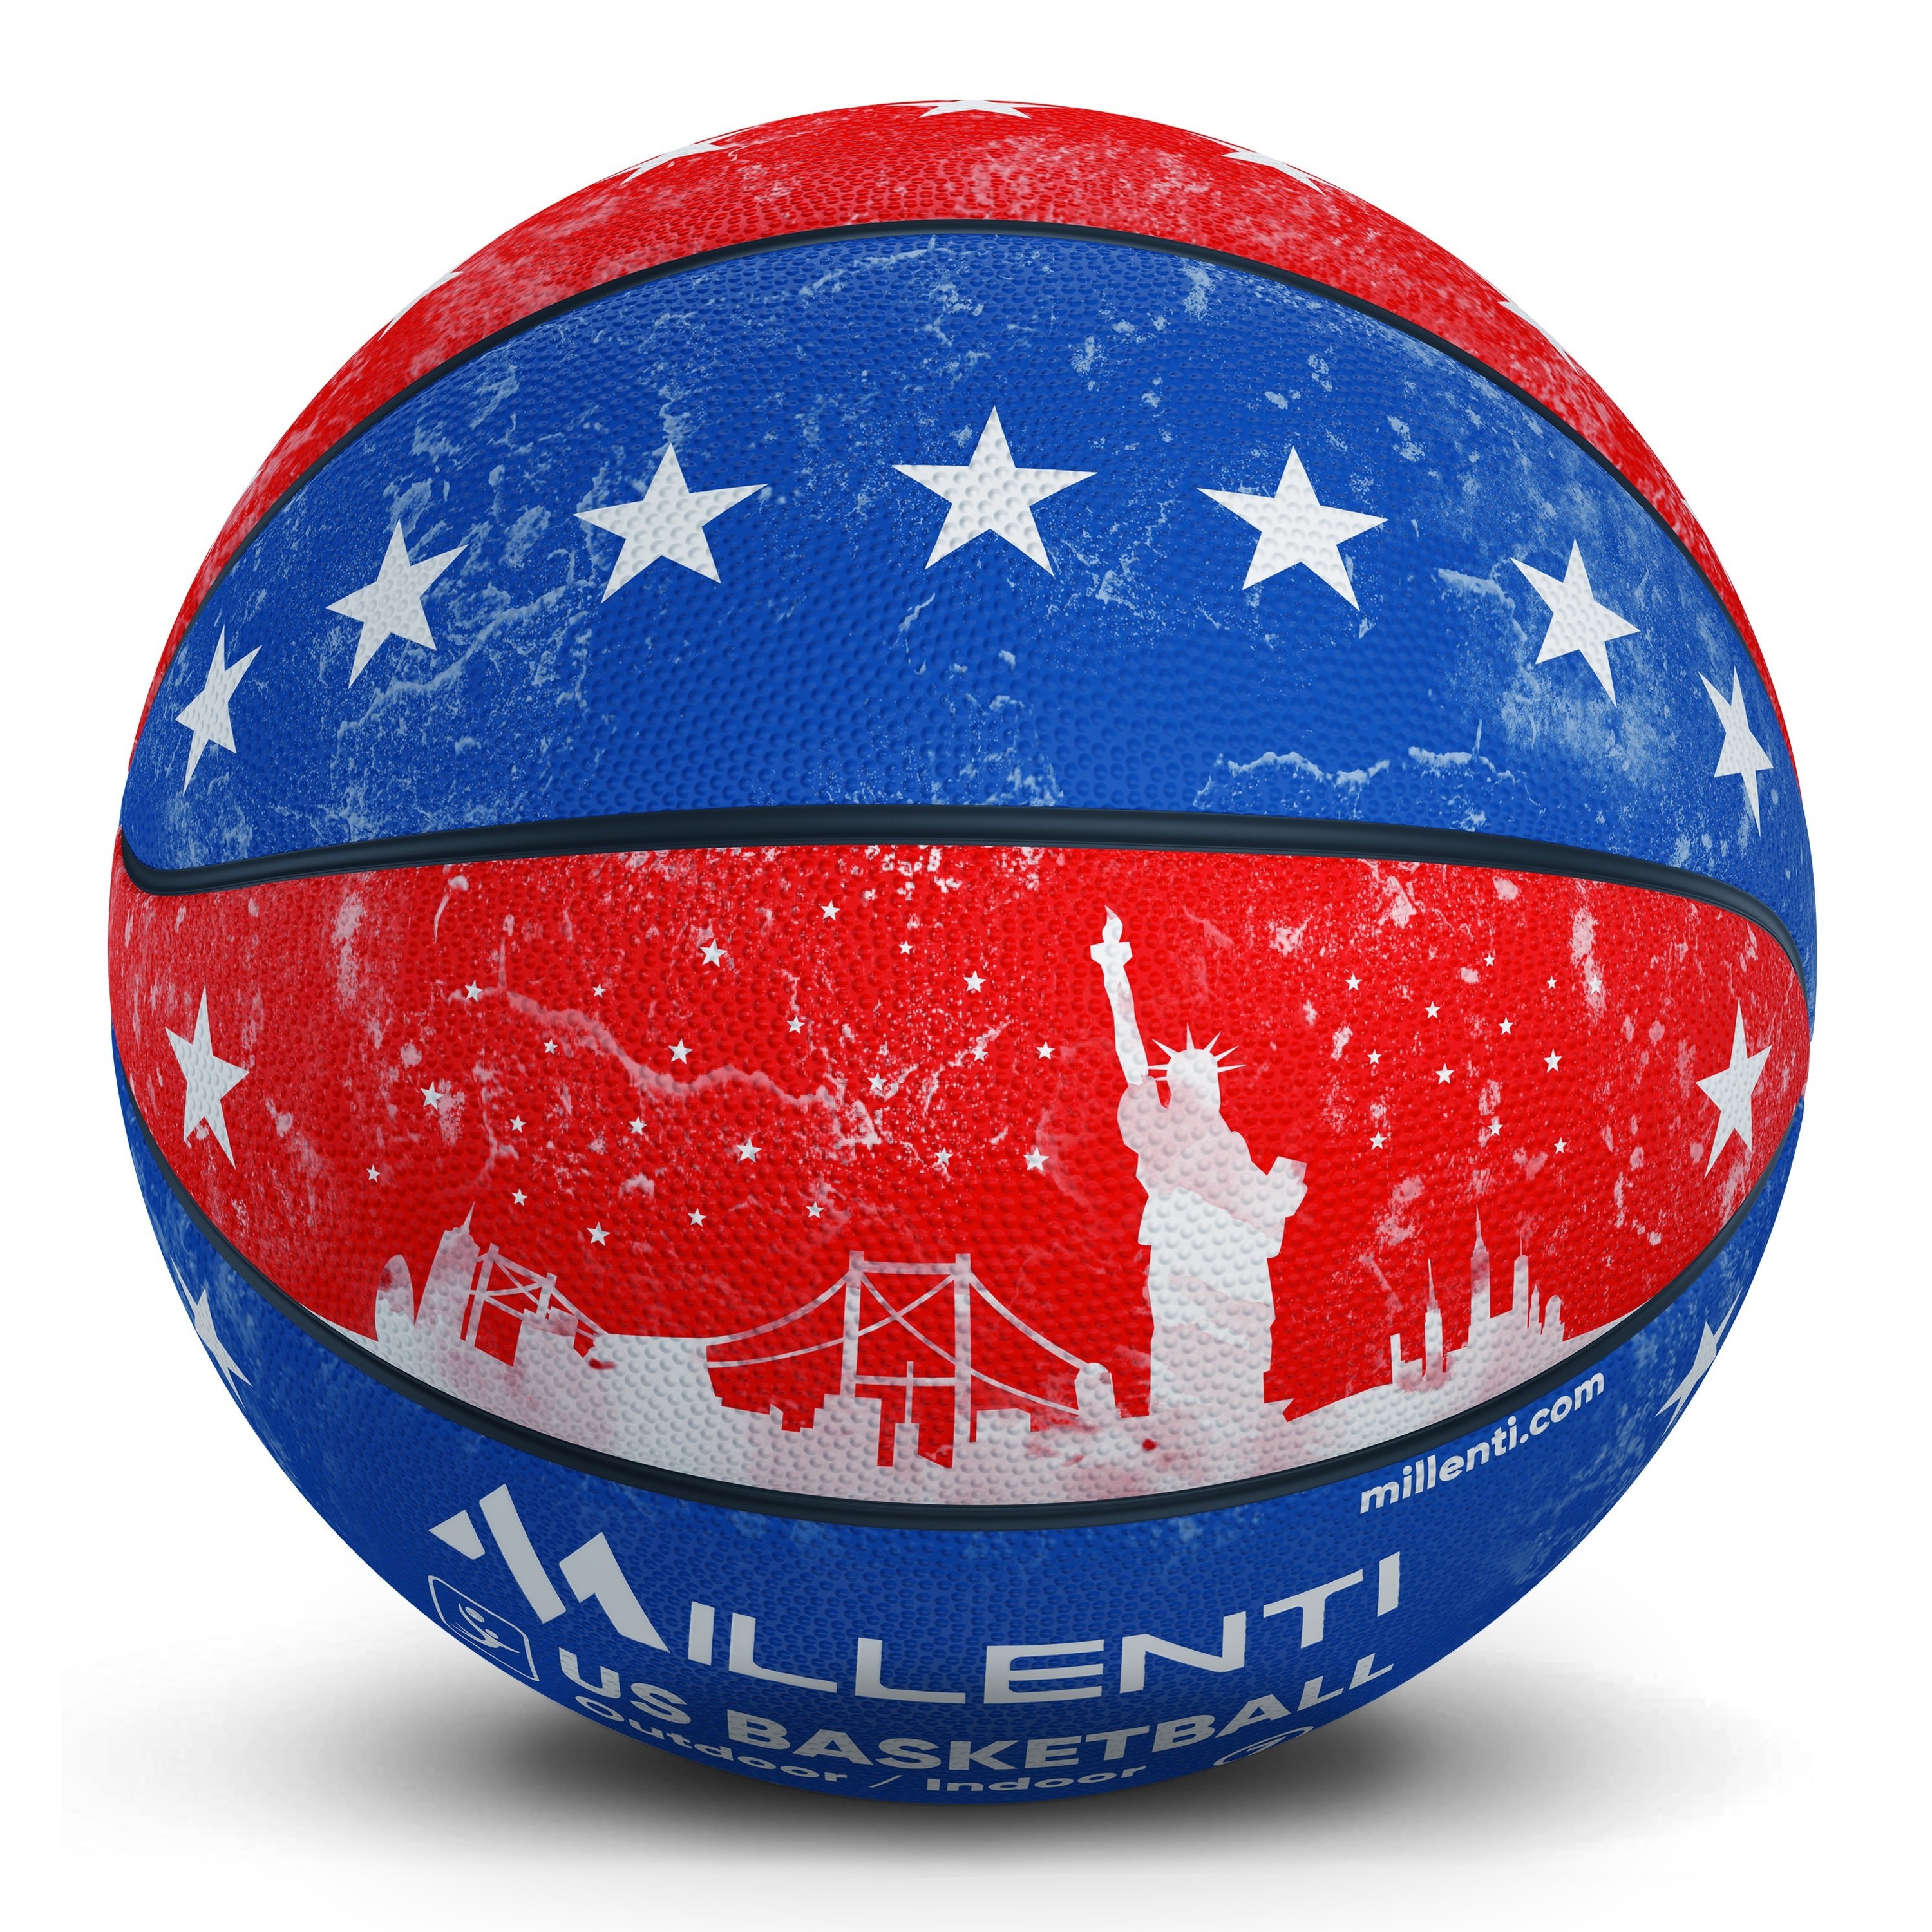 Millenti USA Basketball Ball Outdoor-Indoor - Basketballs with High-Visibility, Easy-To-Track Designs, Rubber Basketball 29.5 - Red White Blue Basketball BB0407RWB